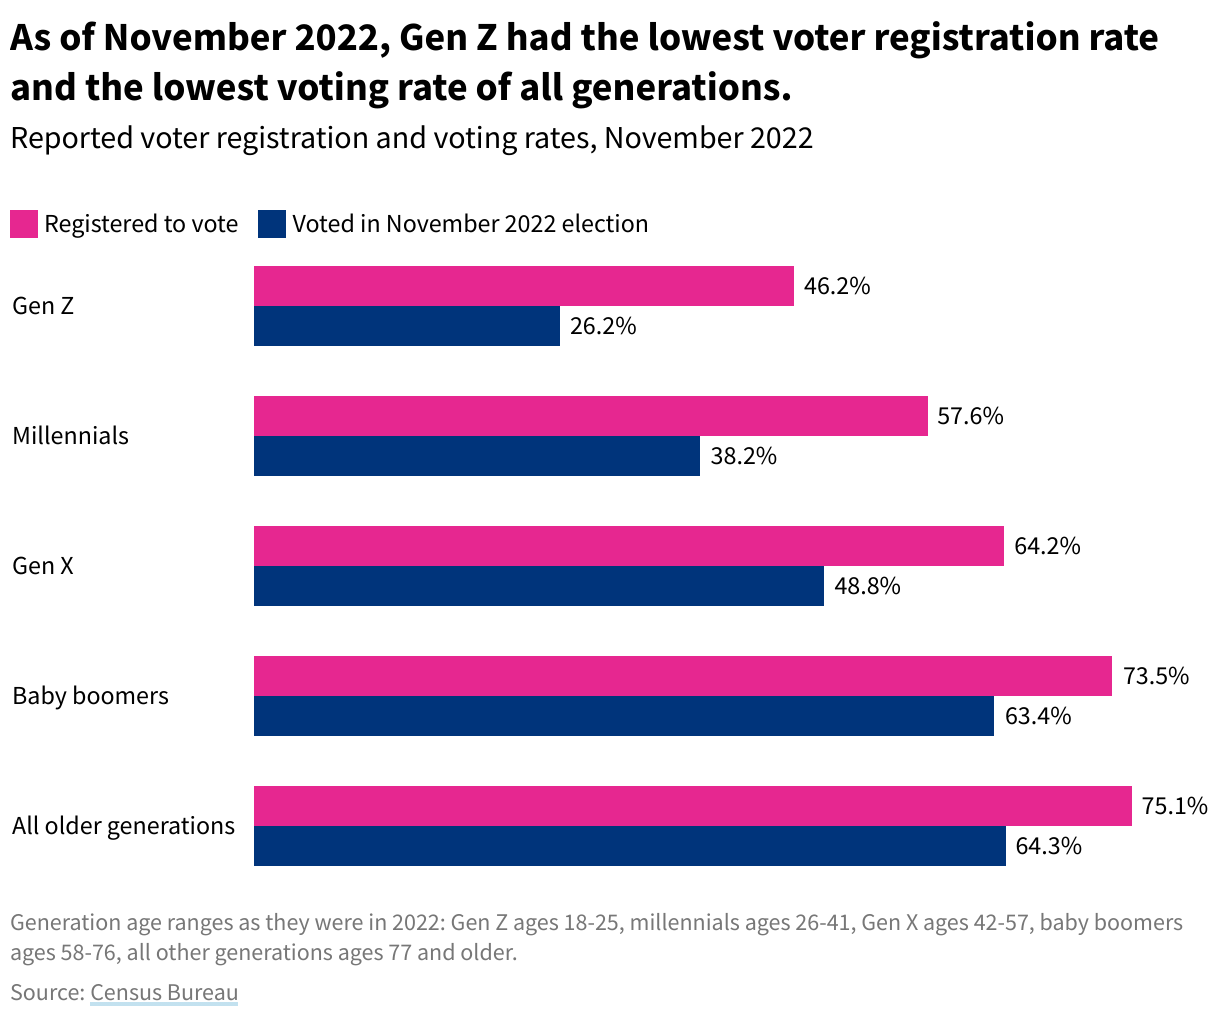 Split bar chart showing voter registration and voting rates by generation in November 2022.